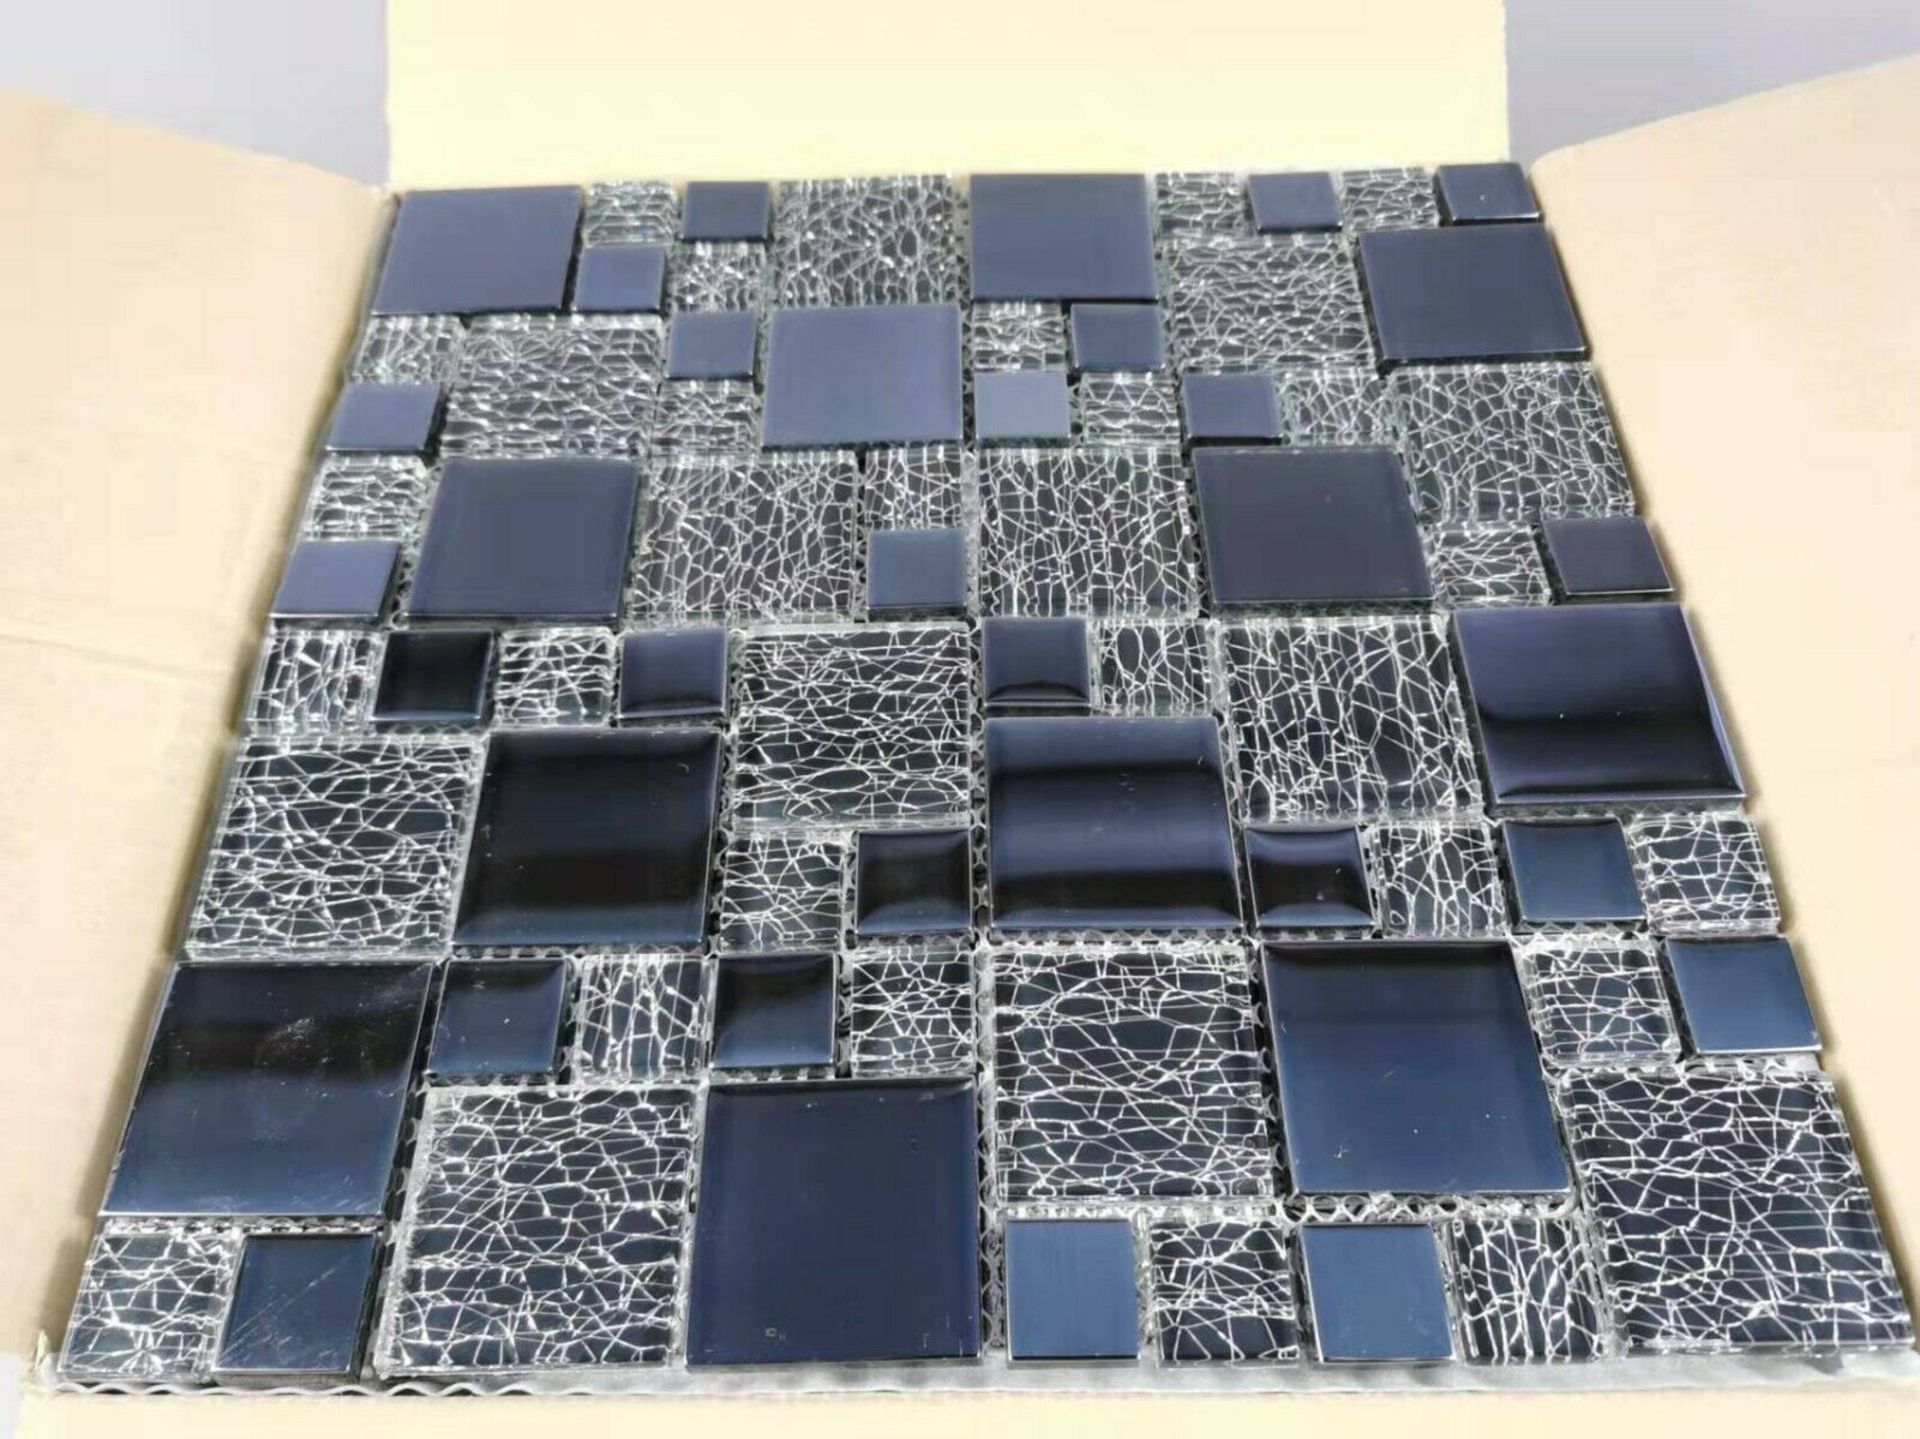 1 Square Metres- High Quality Glass Mosaic Tiles -- Super Saver 300*300*6mm* 11 sheets - Image 5 of 5